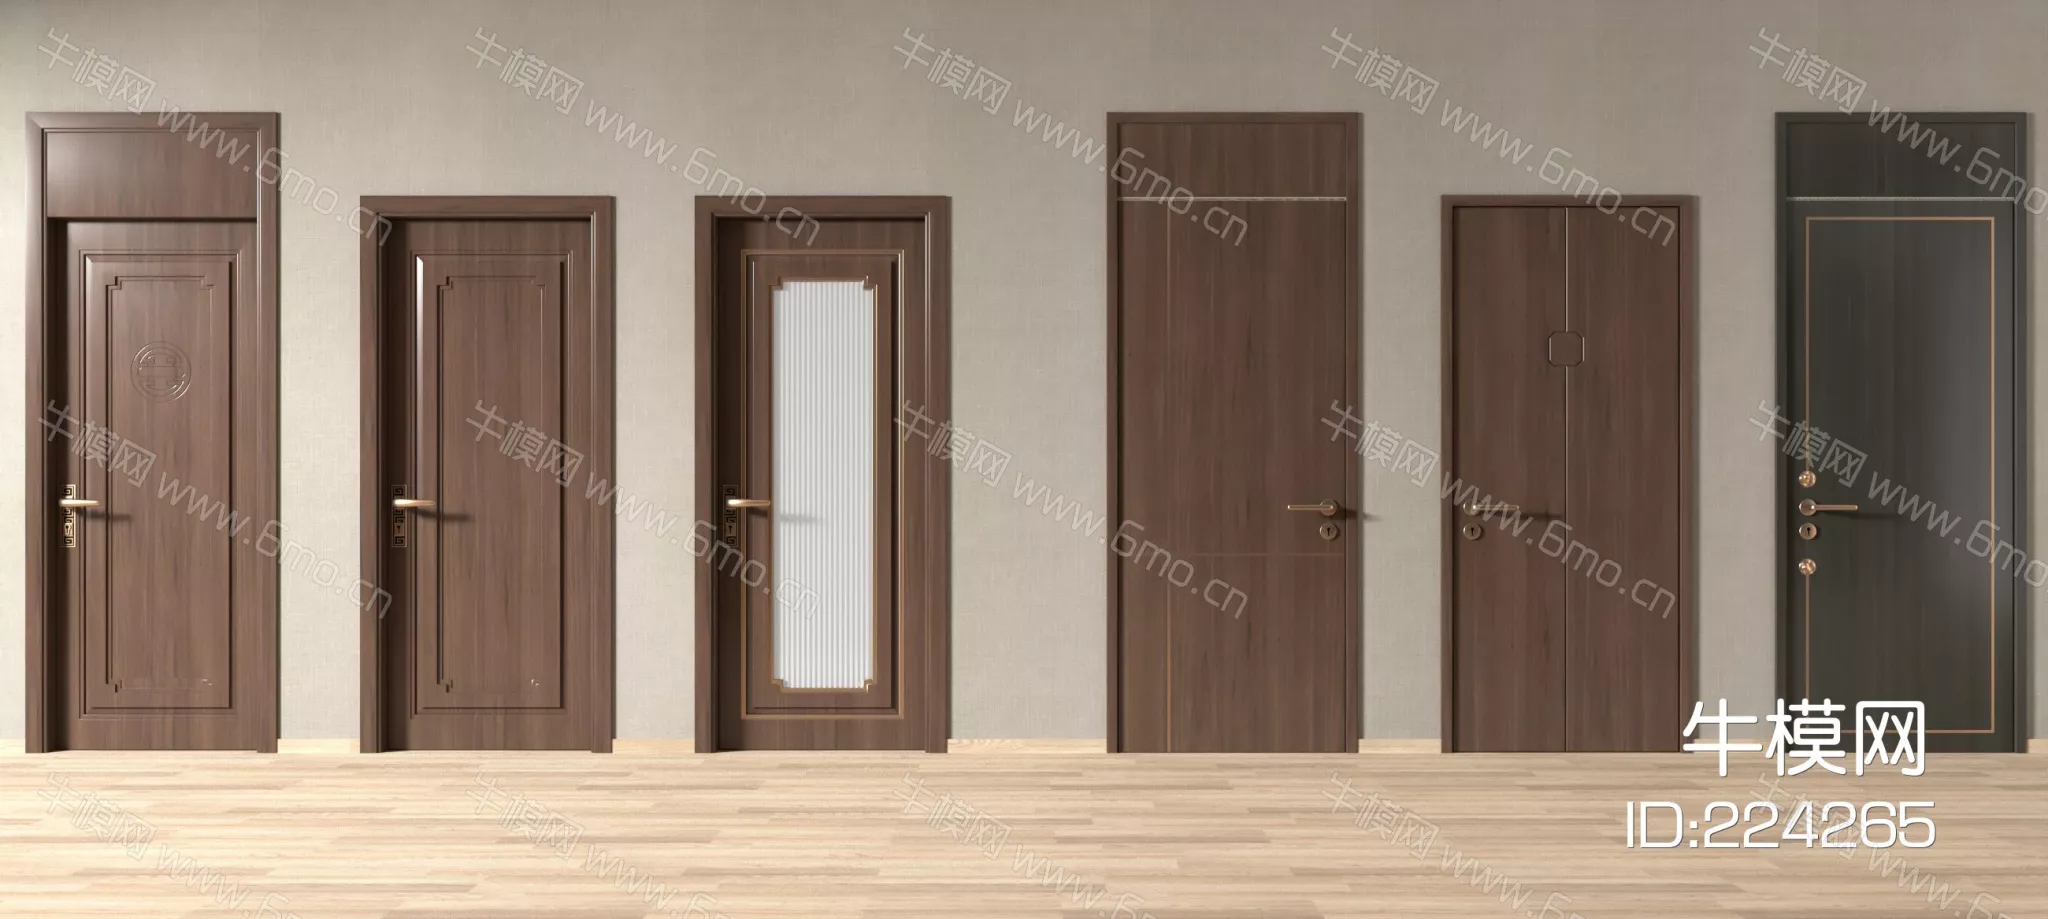 CHINESE DOOR AND WINDOWS - SKETCHUP 3D MODEL - VRAY - 224265